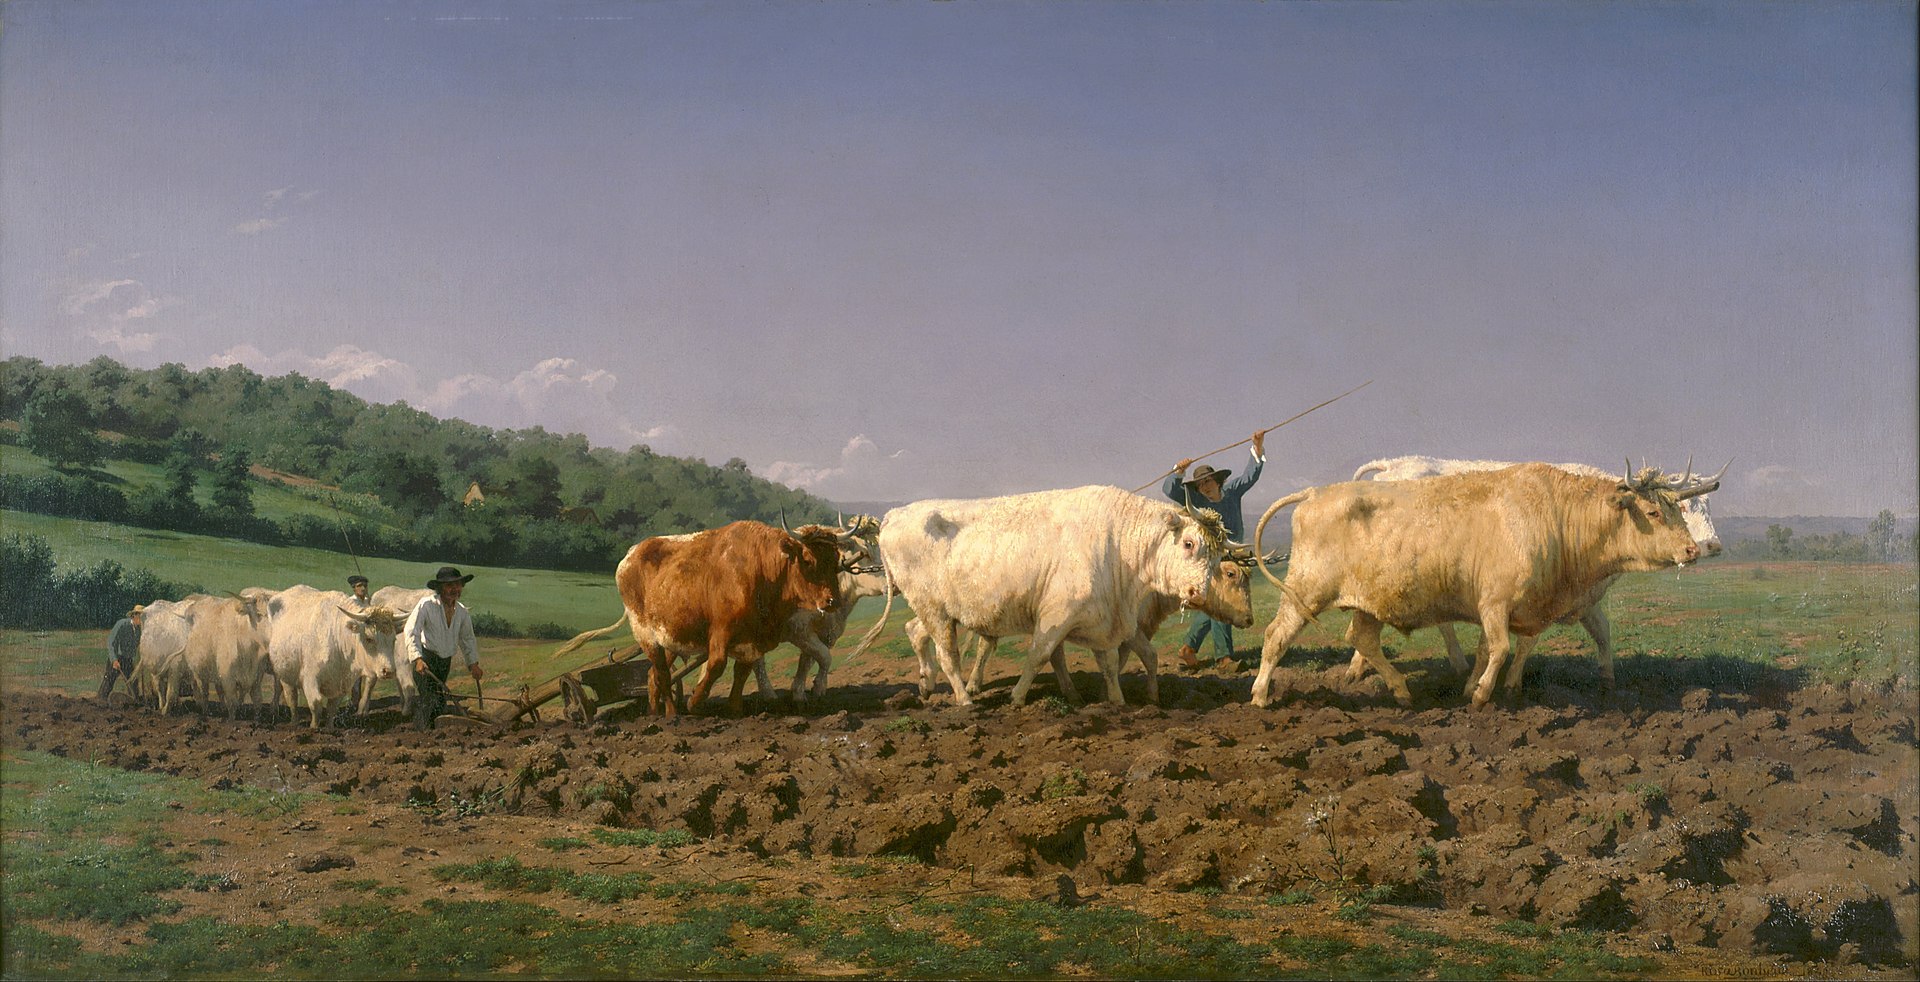 A team of oxen plough dirt against a green landscape and blue sky